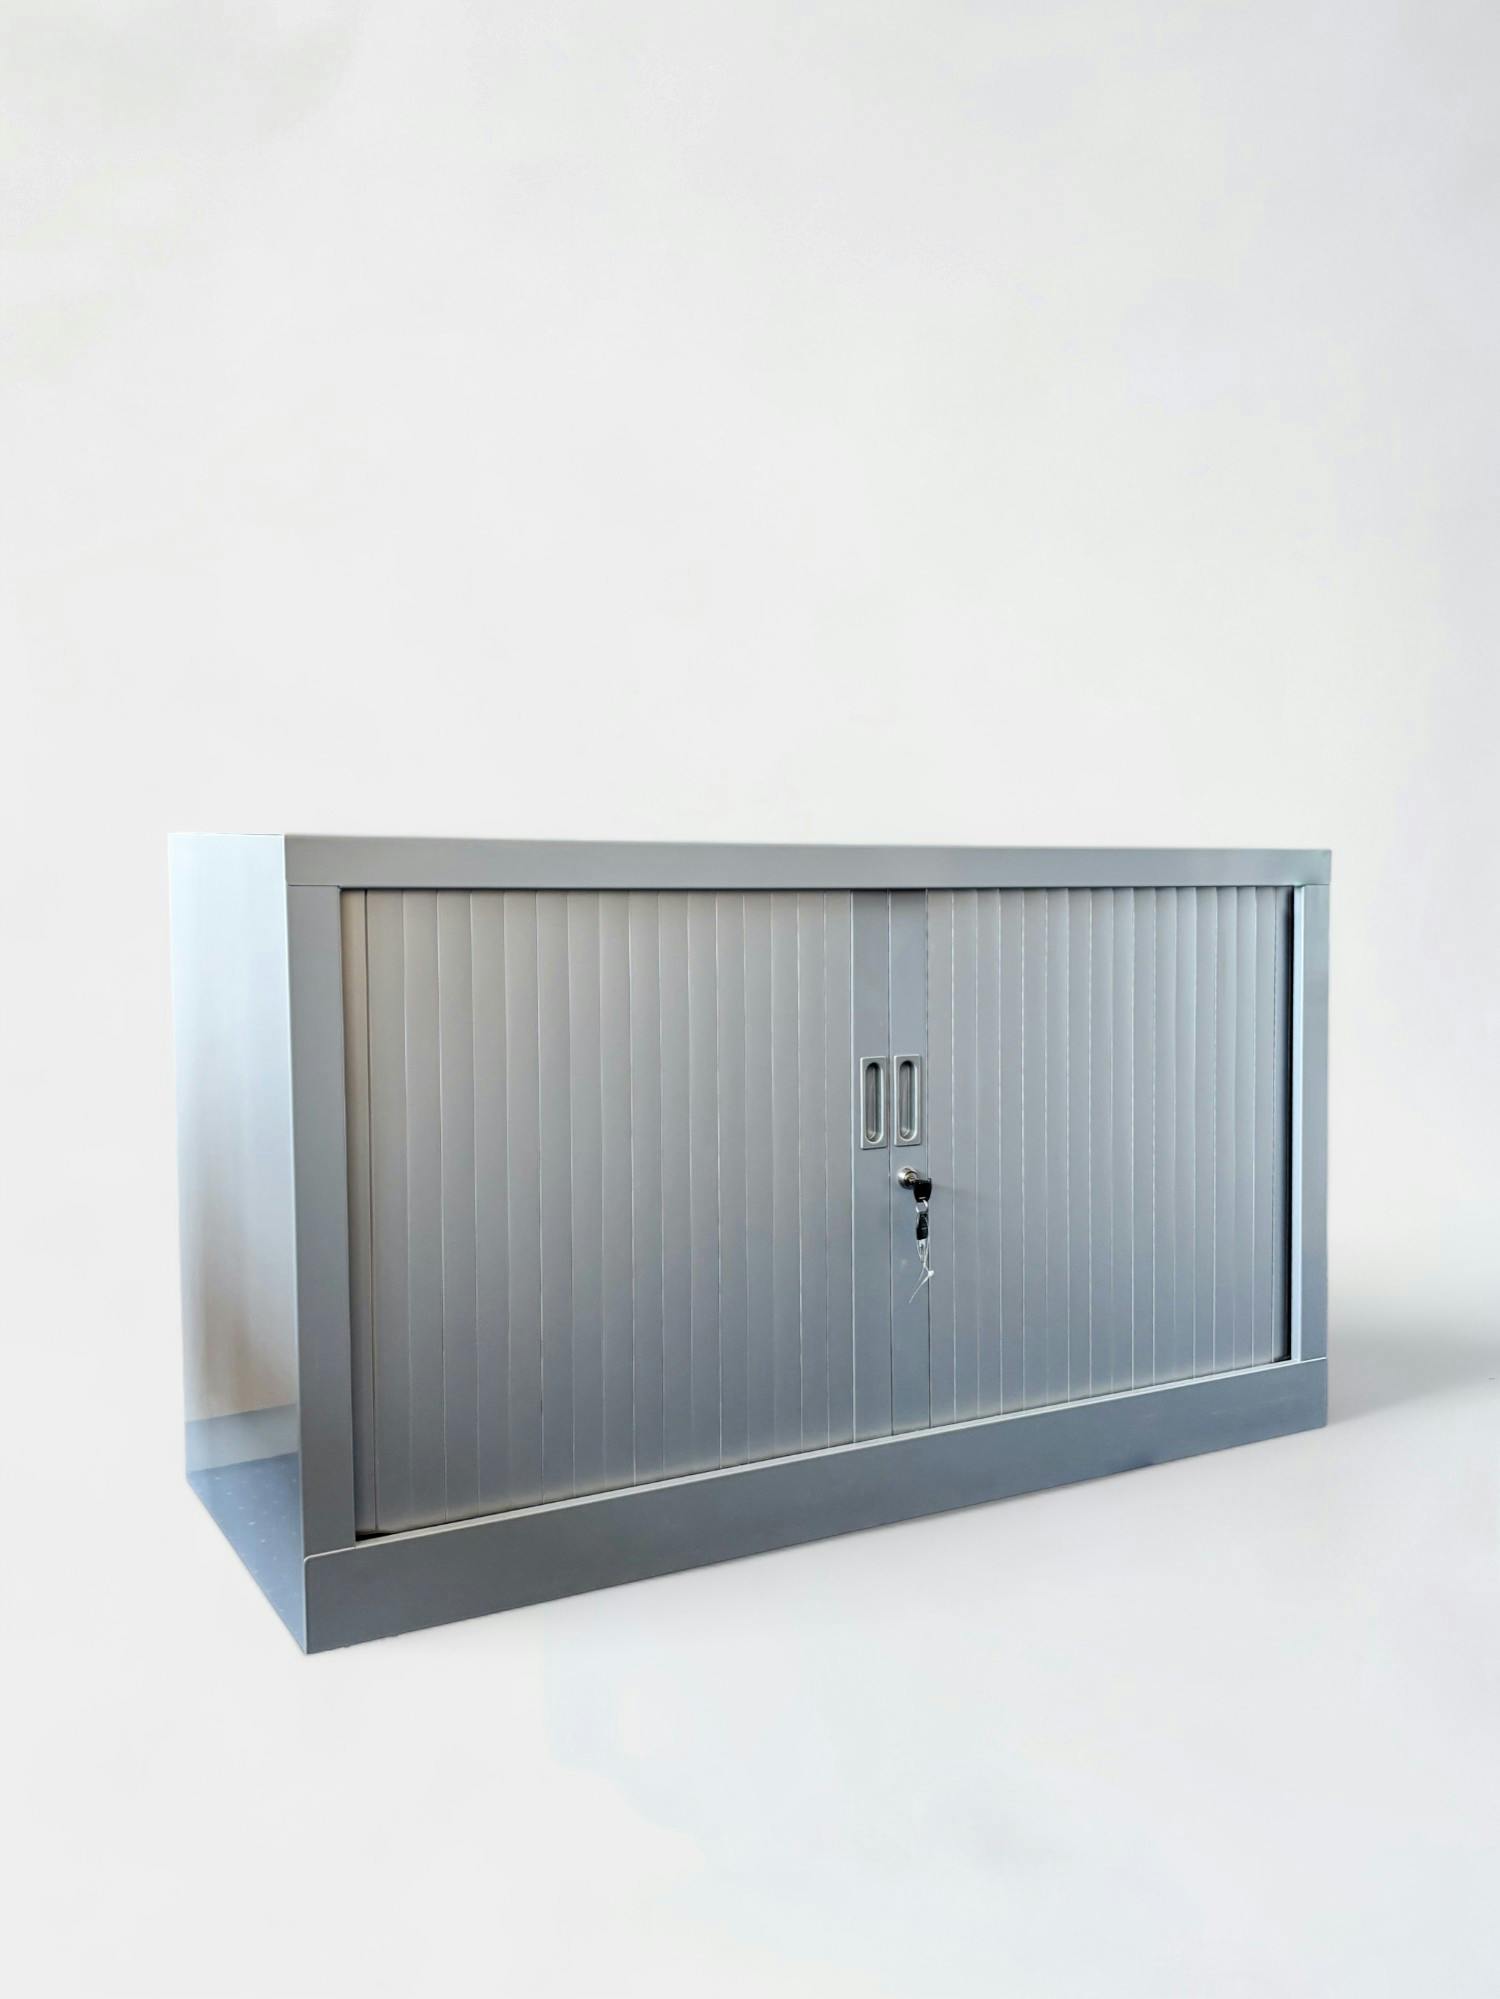 Charcoal Grey Metal Storage Cabinet with Sliding Doors and Adjustable Shelves - Relieve Furniture